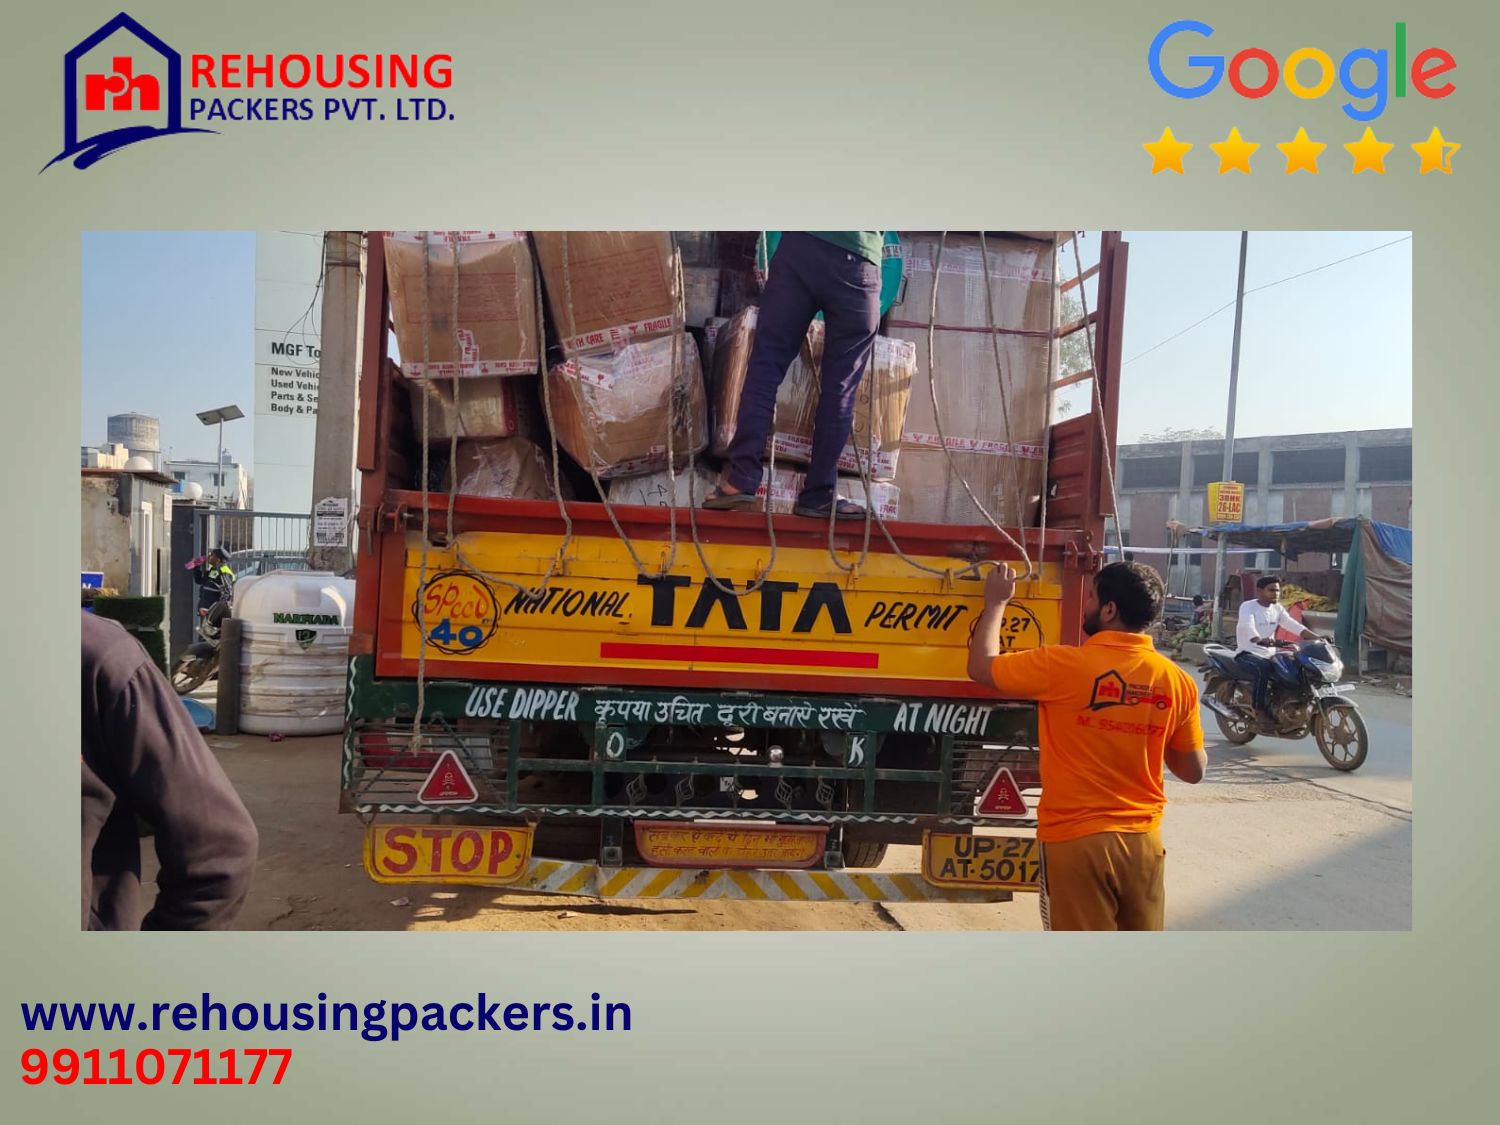 Packers and Movers from Noida to Chandigarh